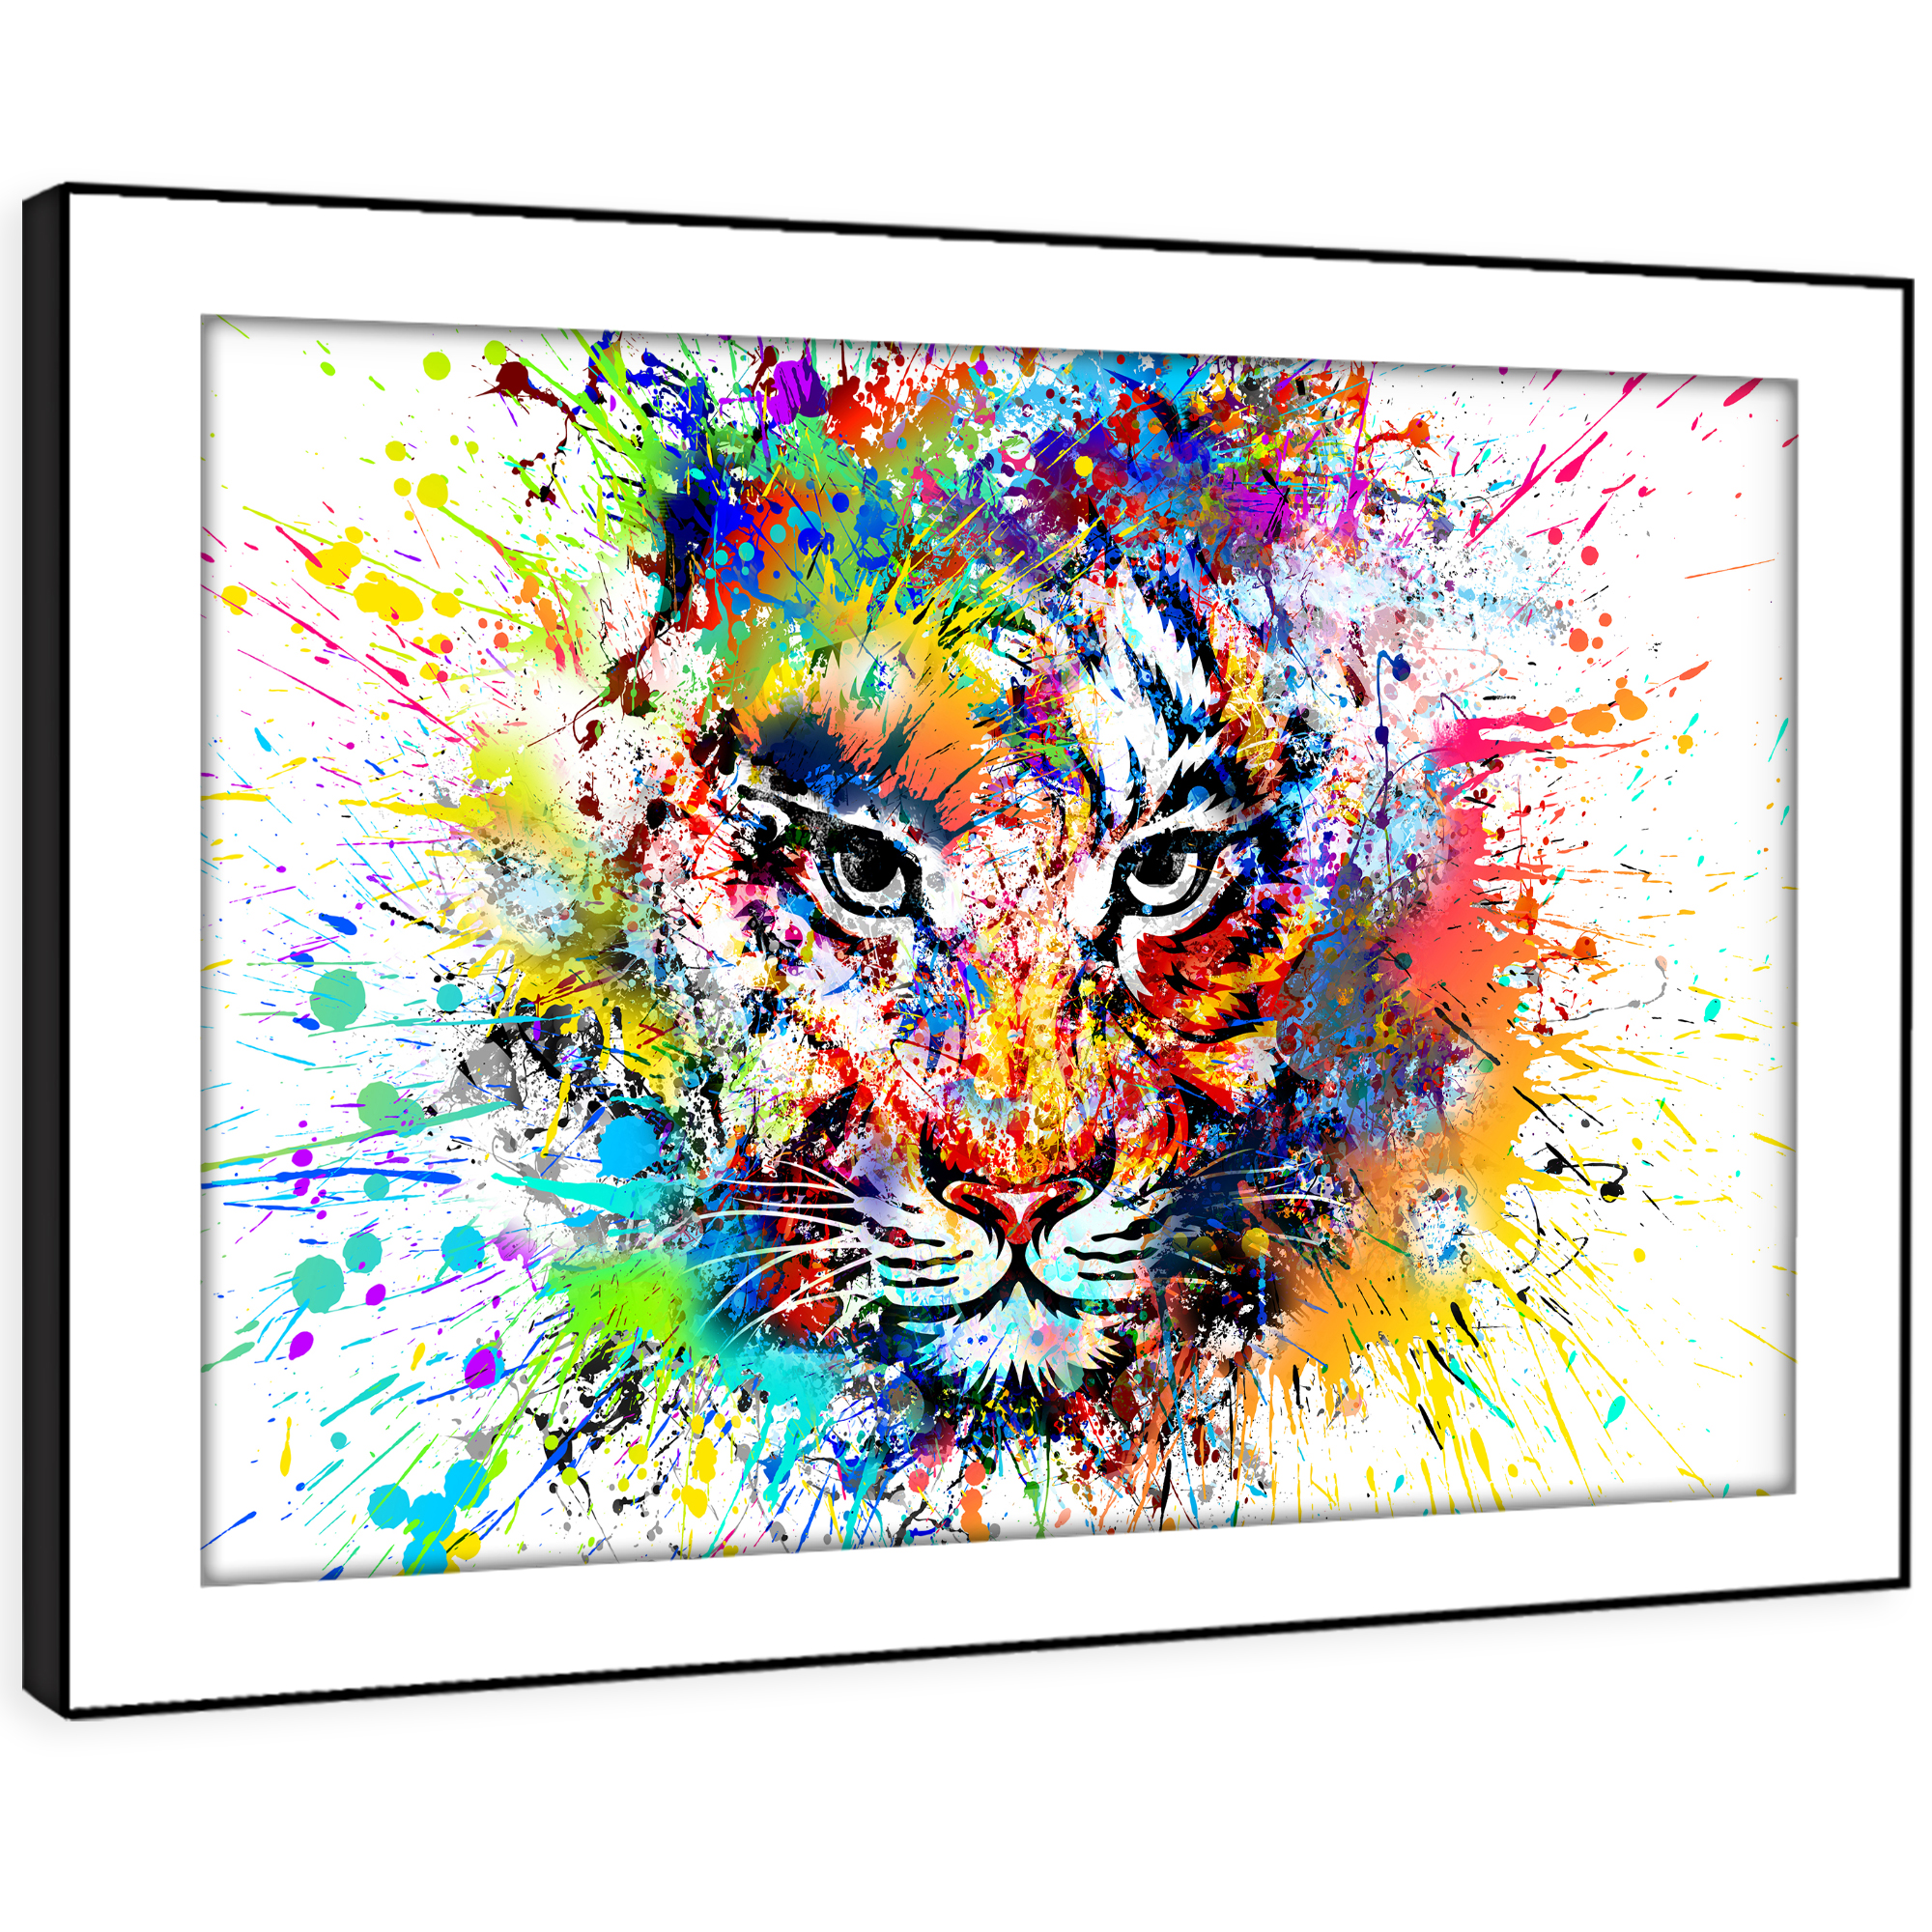 A723 Yellow Red Tiger Abstract Funky Animal Framed Wall Art Large Picture Prints Ebay